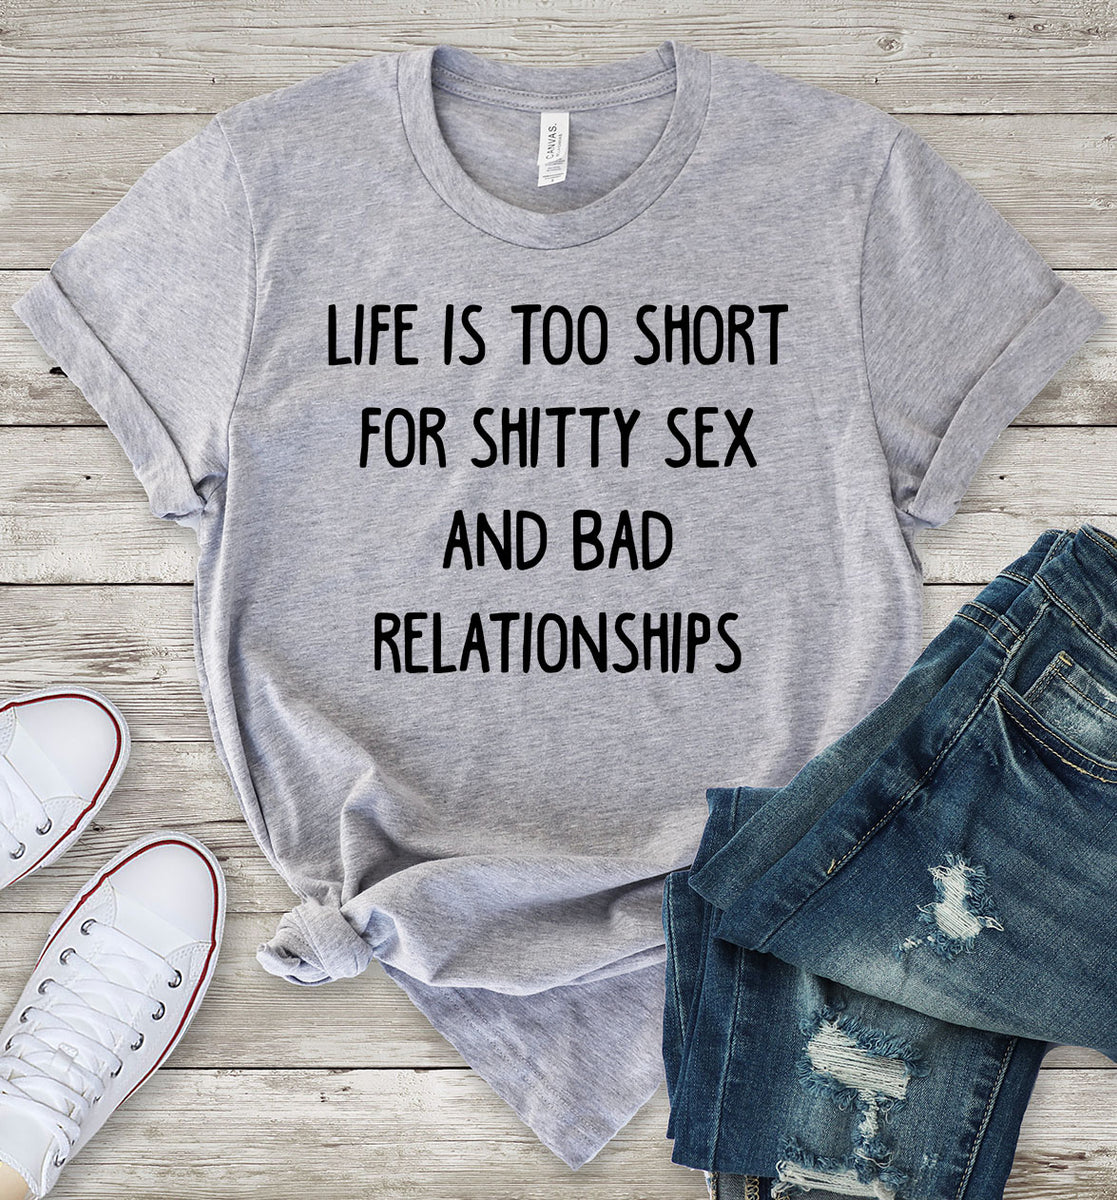 Life is Too Short For Shitty Sex and Bad Relationships Light Grey T-Shirt